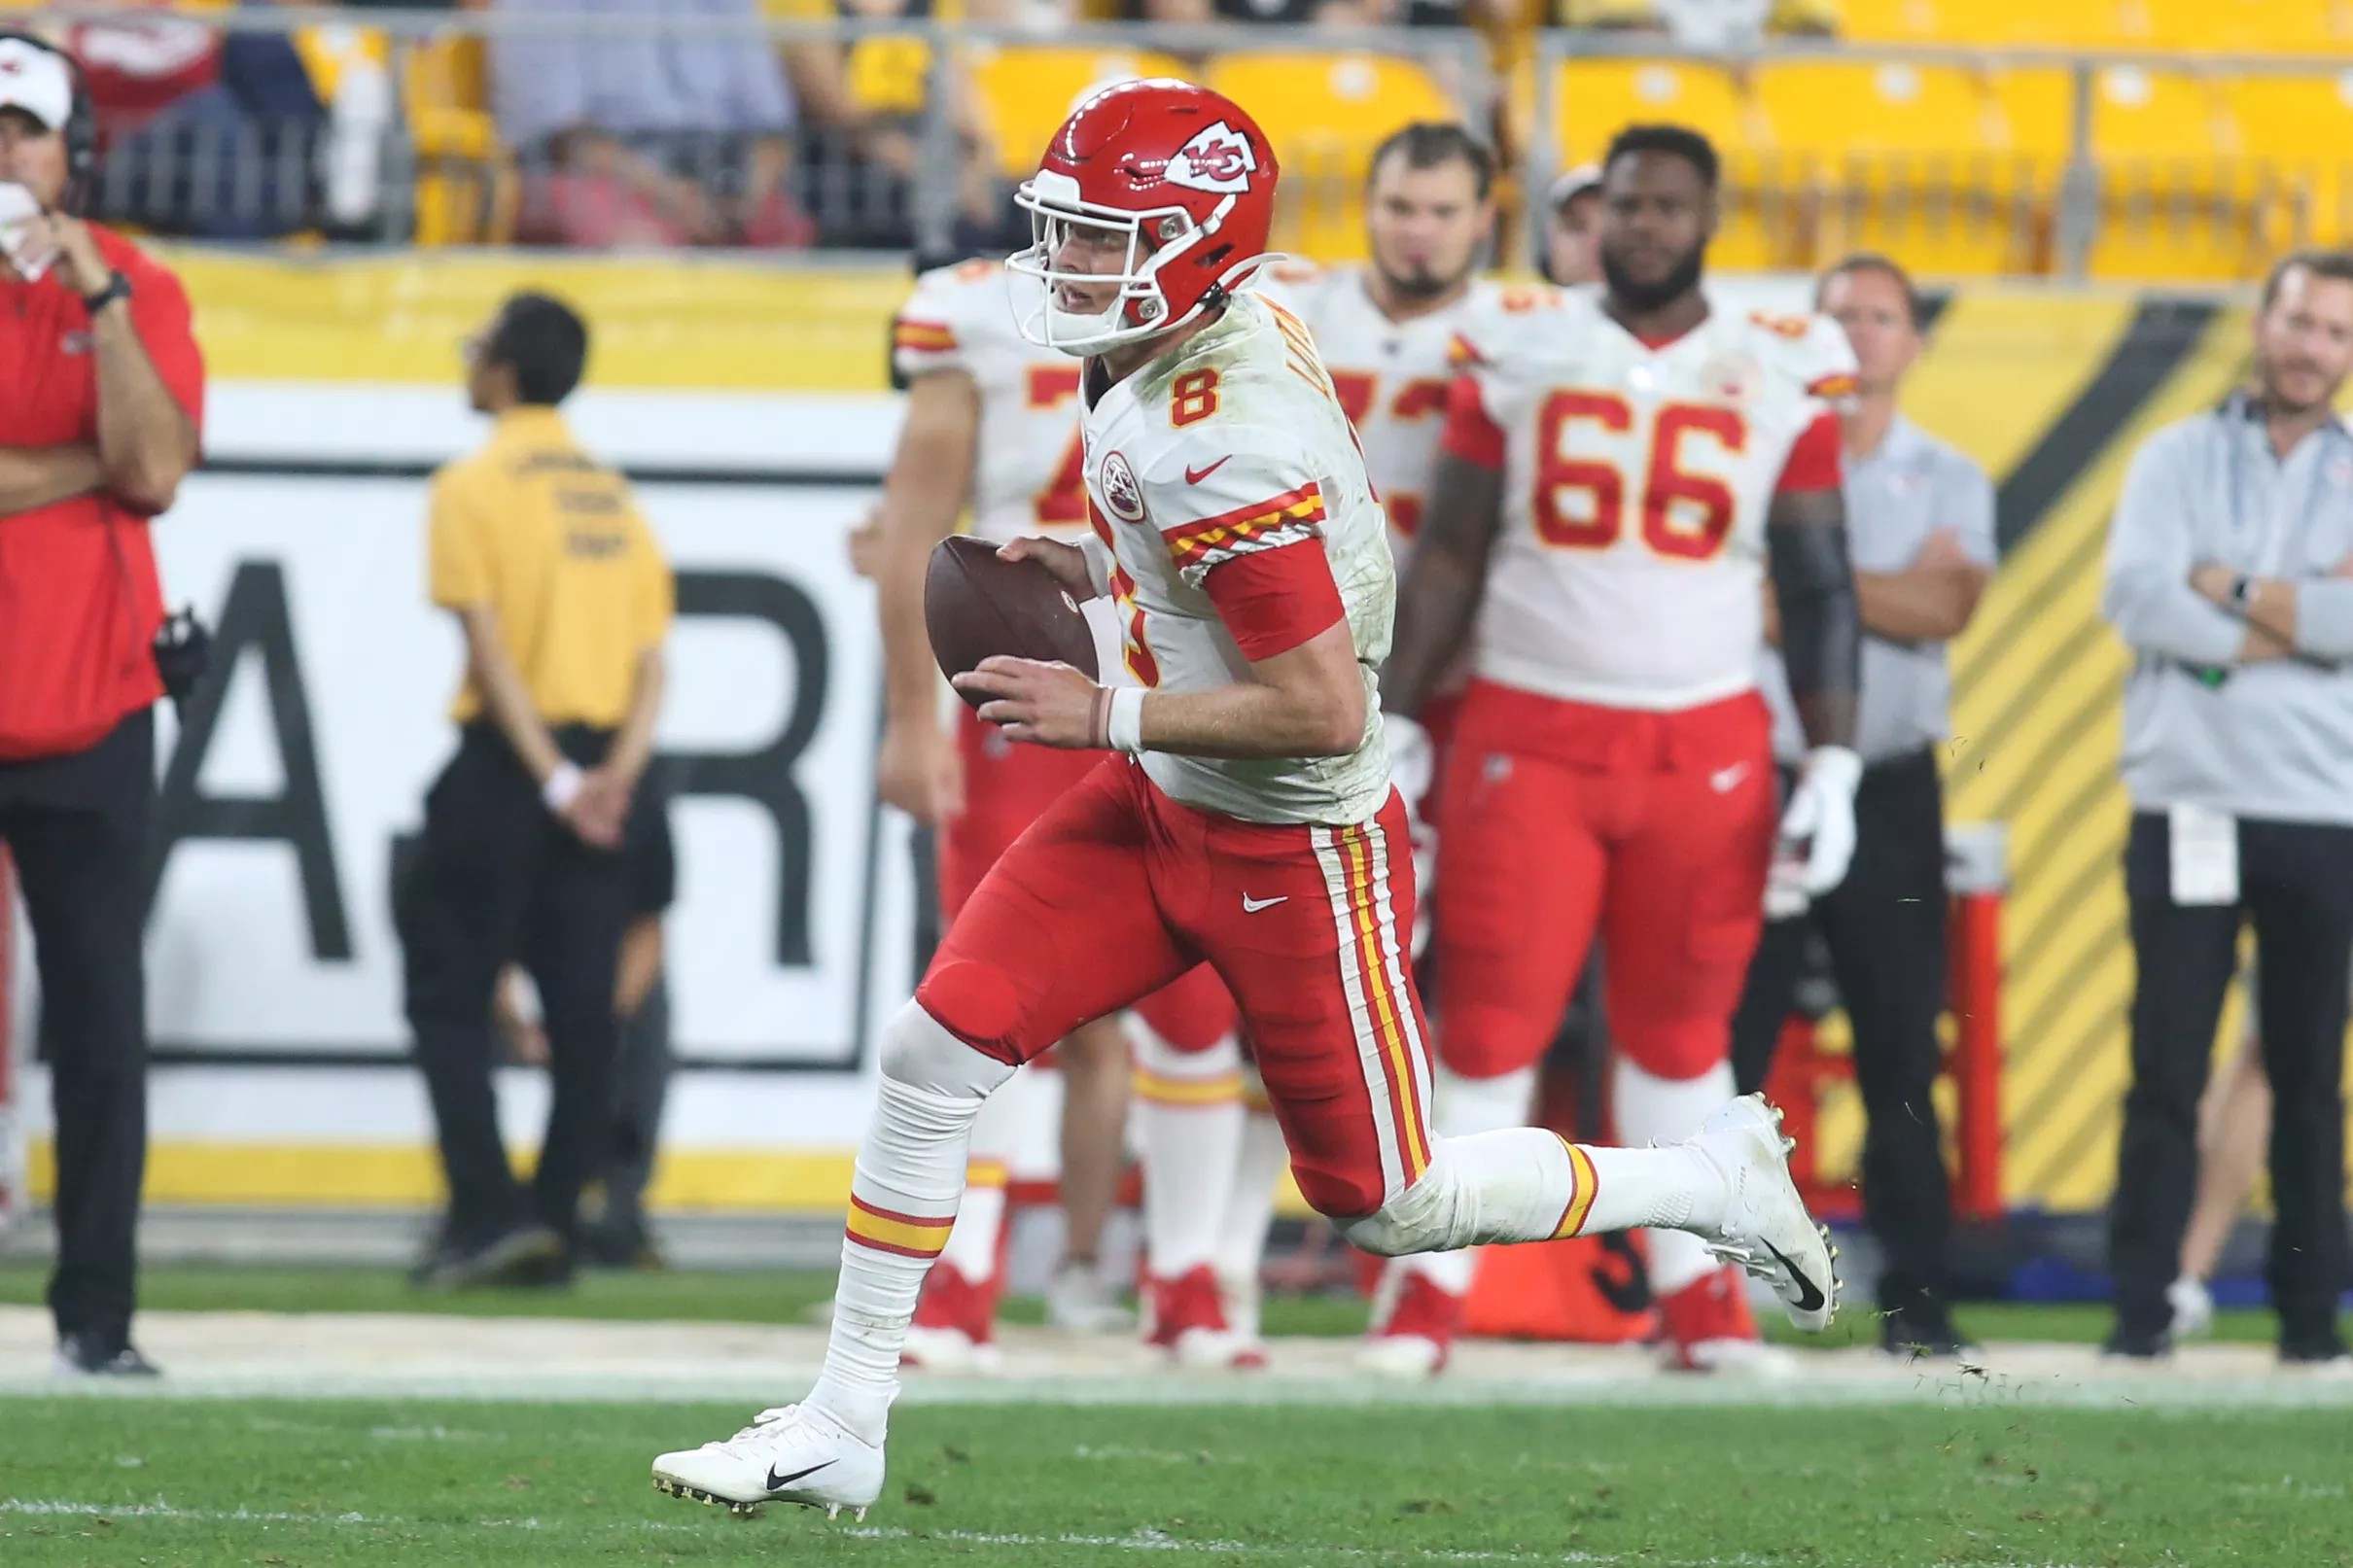 One Chiefs player has the clear lead to become the third quarterback